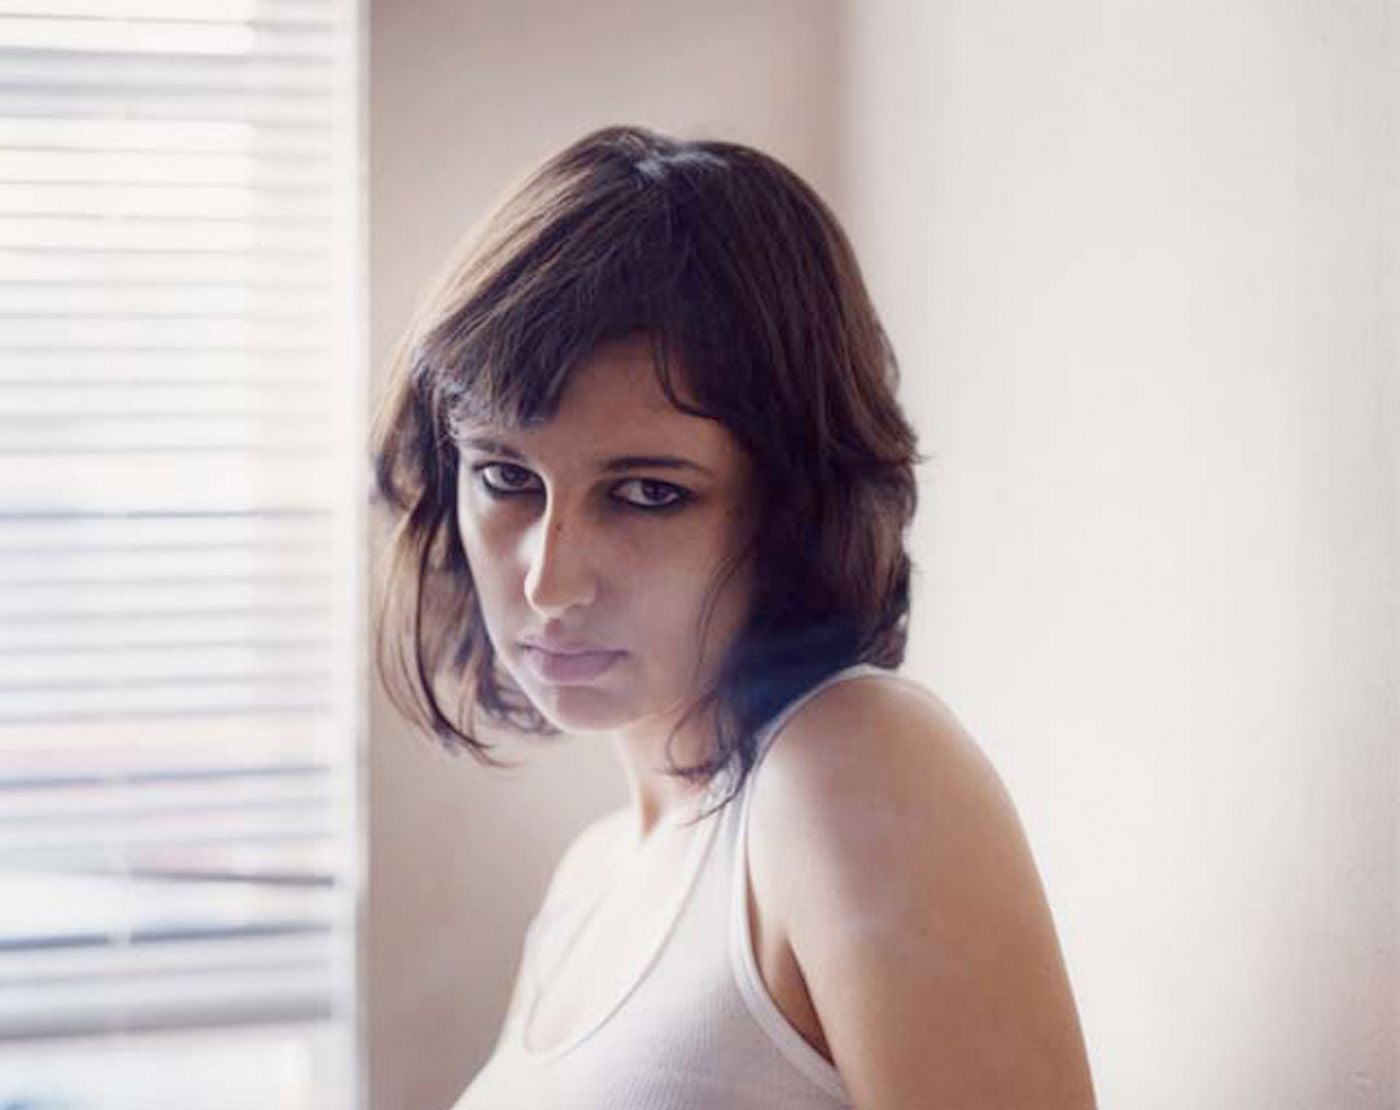 Todd Hido: Between the Two (First Printing) [SIGNED]